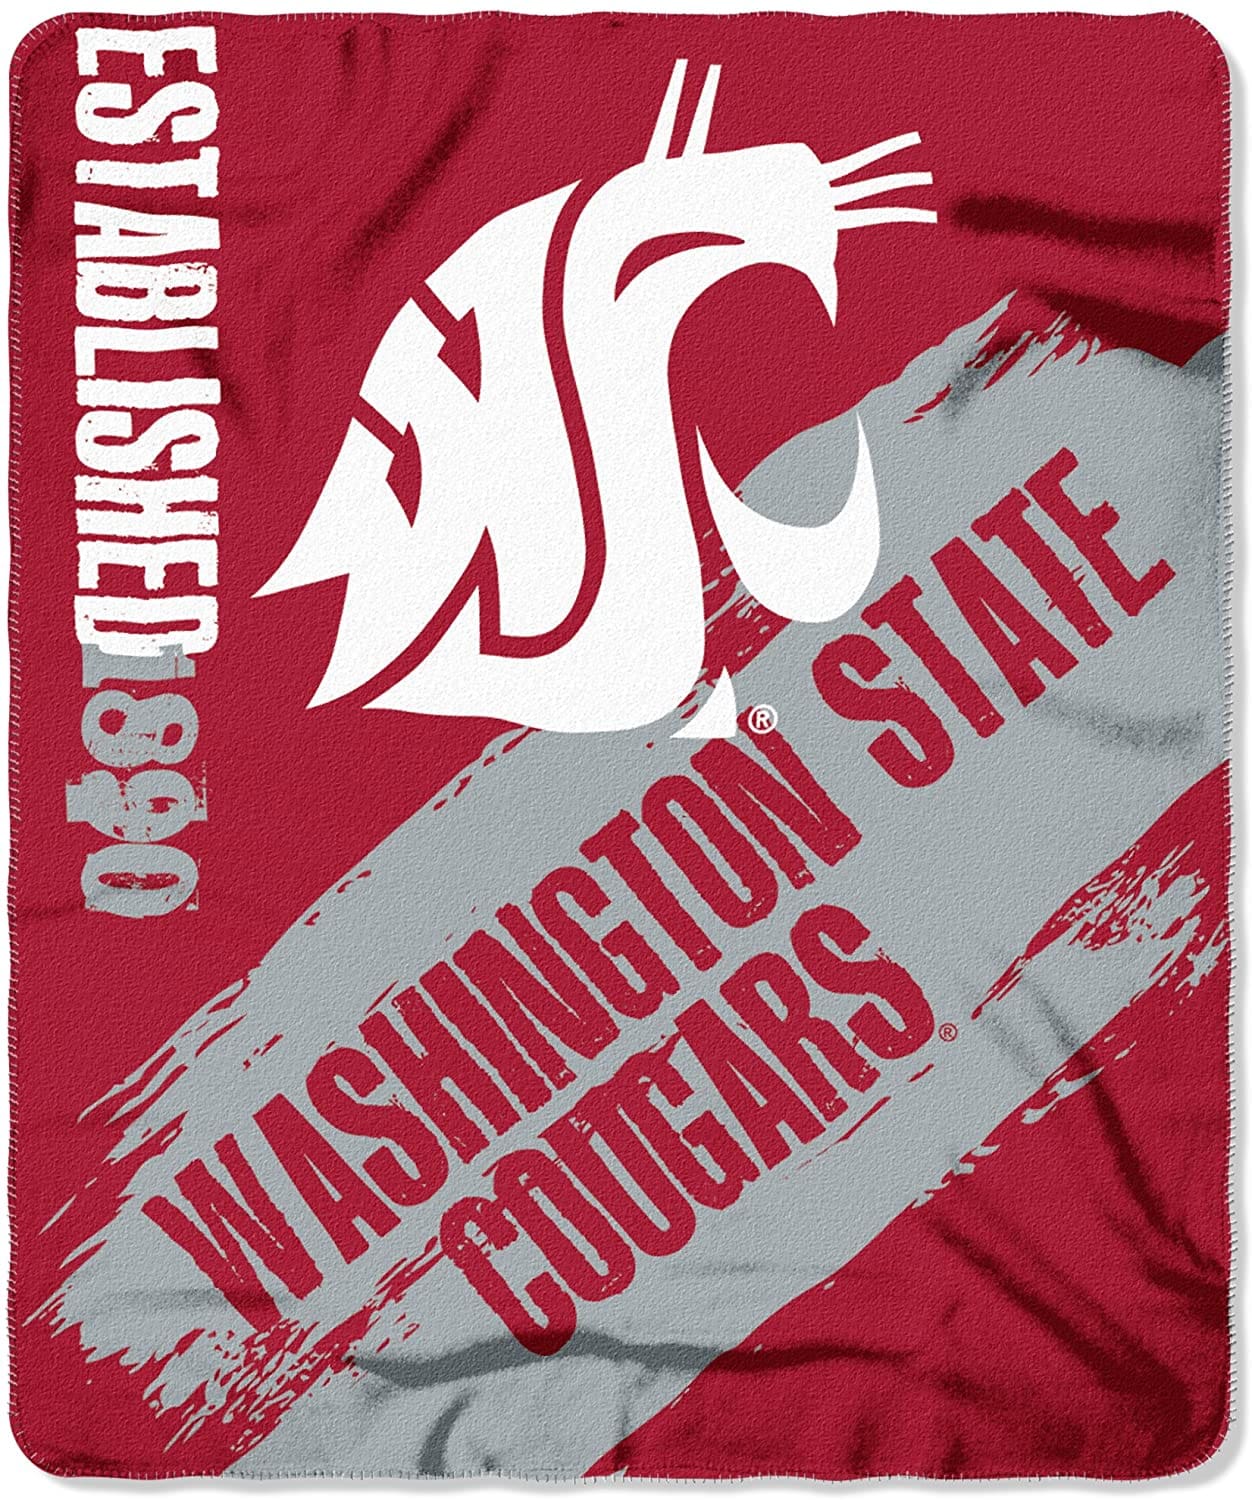 Officially Licensed Ncaa Printed Throw Washington State Cougars Fleece Blanket